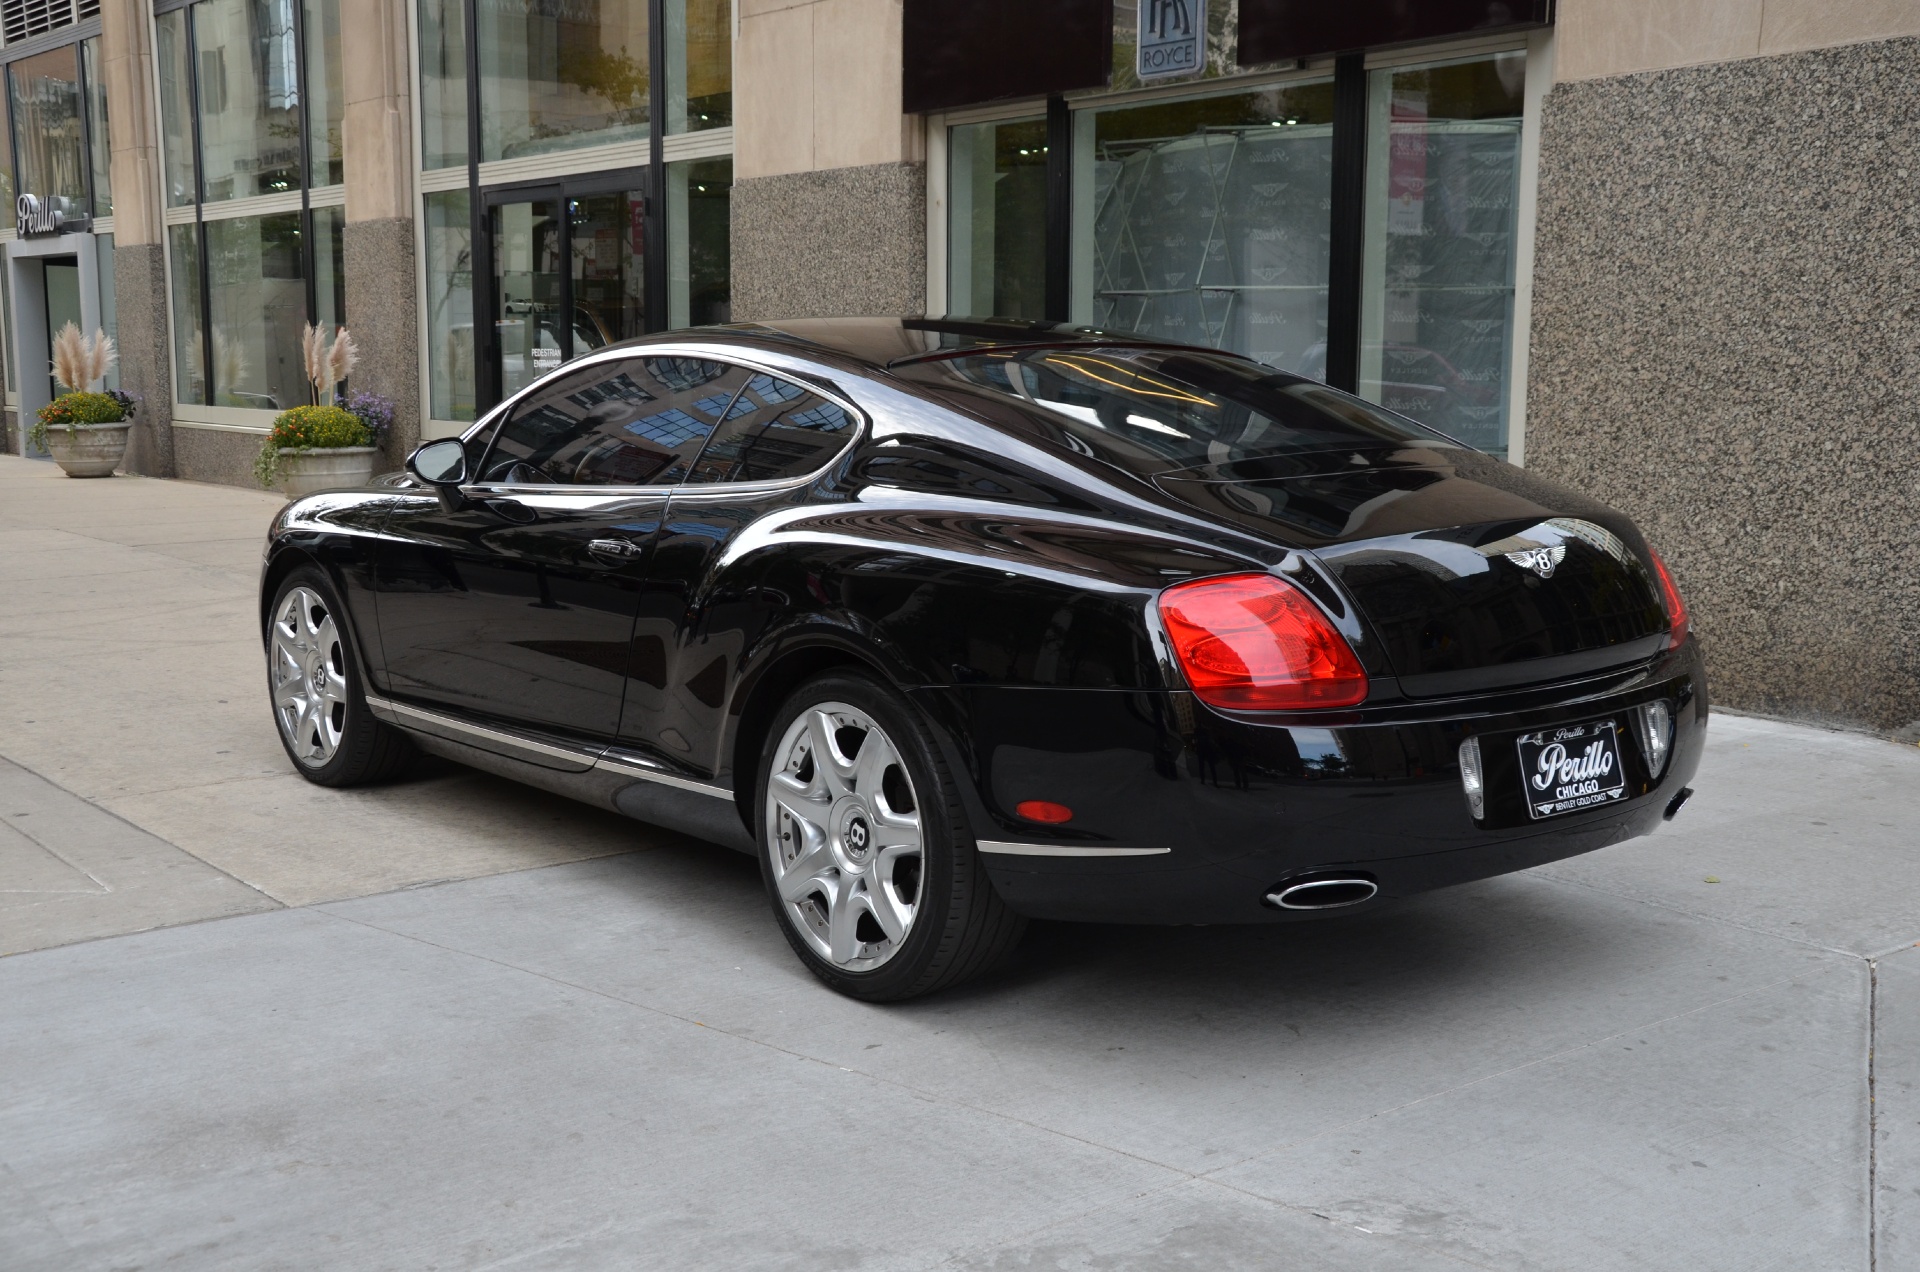 2007 Bentley Continental GT Stock # GC1713A for sale near Chicago, IL | IL  Bentley Dealer